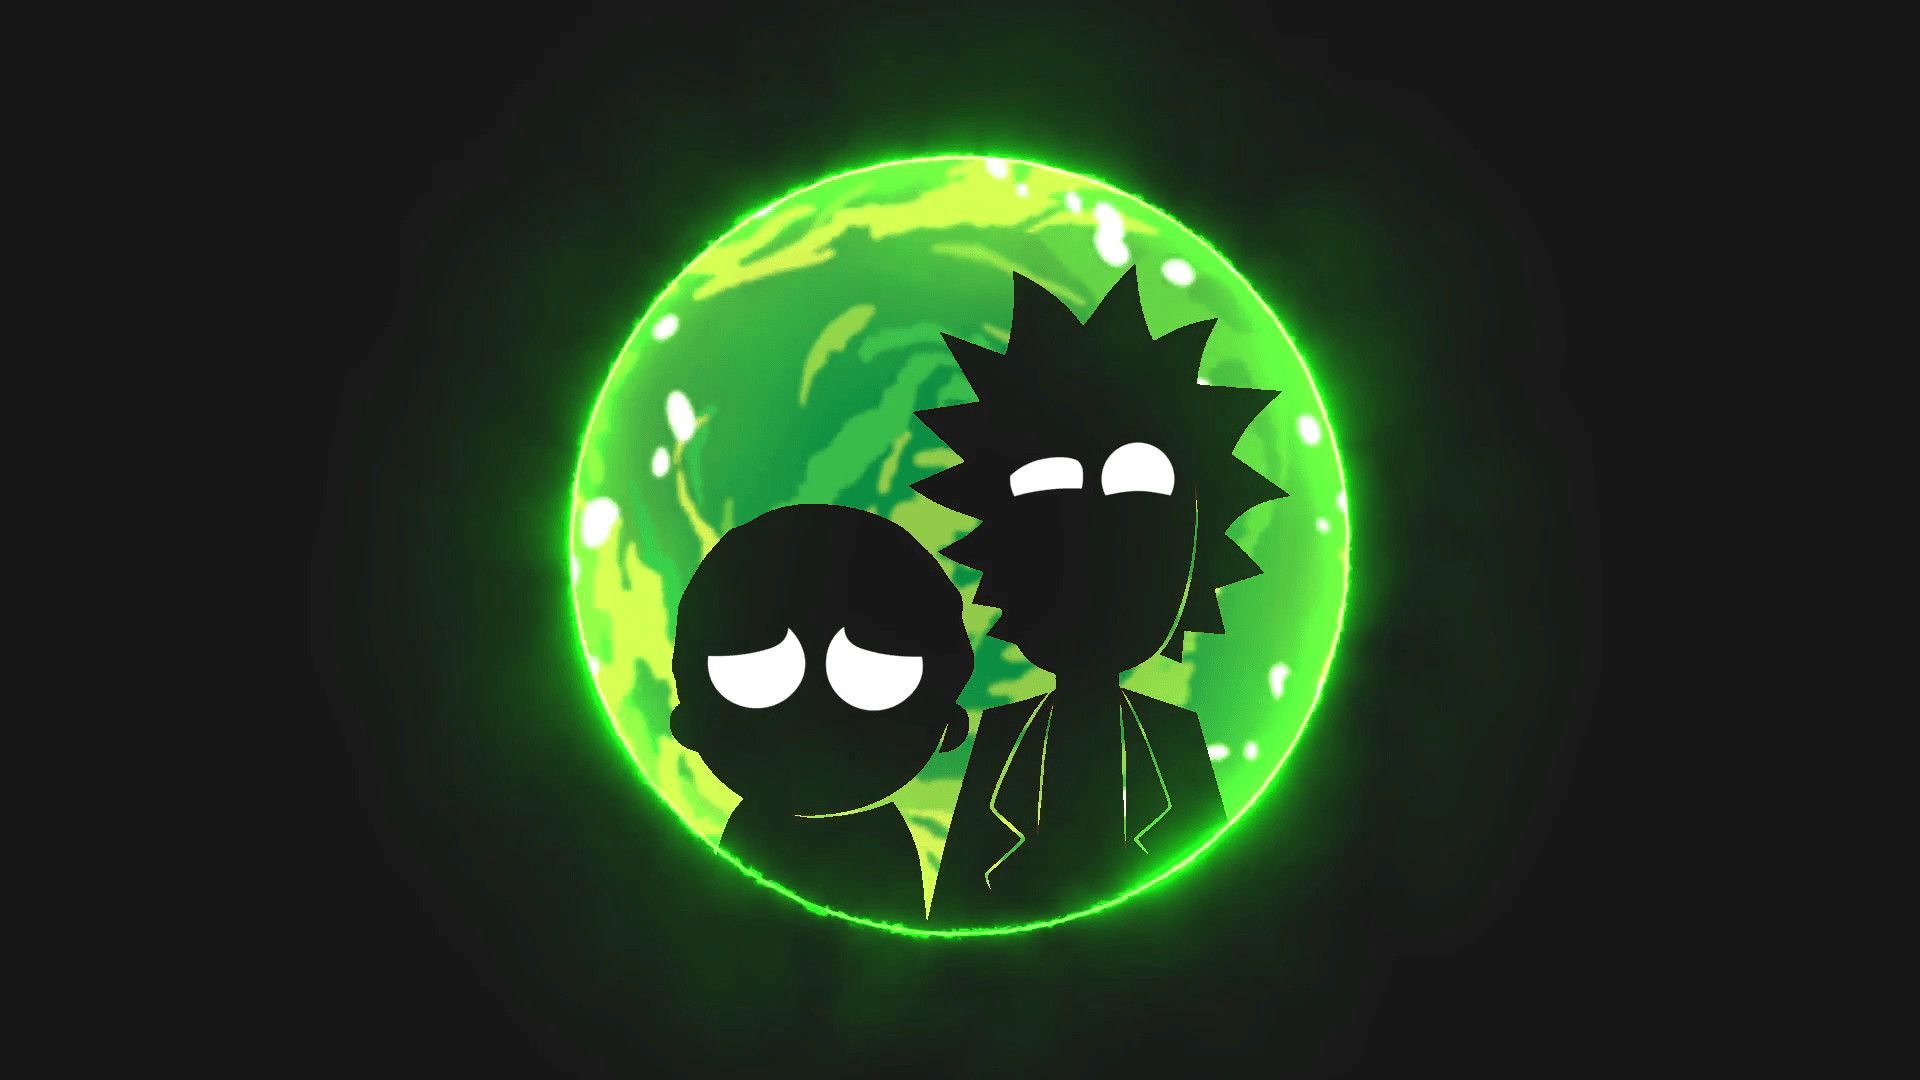 Rick And Morty Wallpaper Lovely Rick And Morty Pics HD Green Black Silhouette. Cartoon wallpaper, Live wallpaper iphone, Live wallpaper